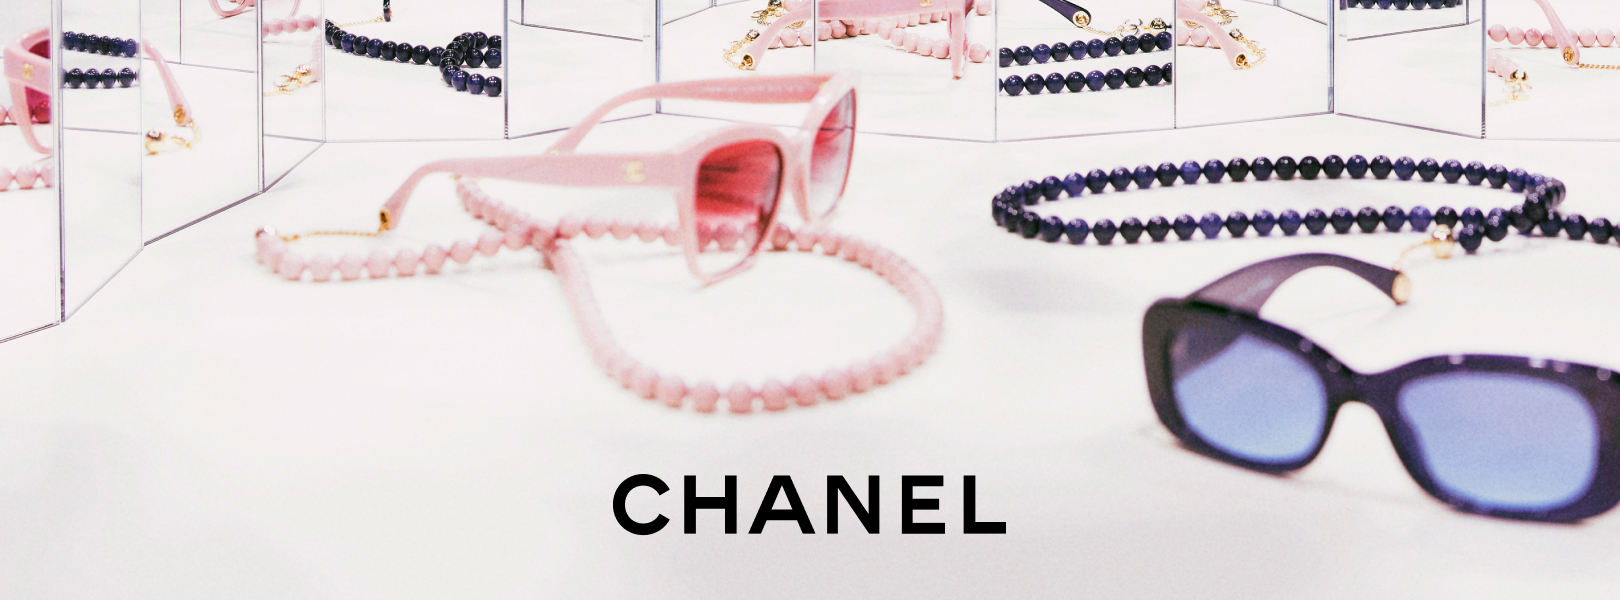 ACCESSORISE YOUR EYES WITH CHANEL